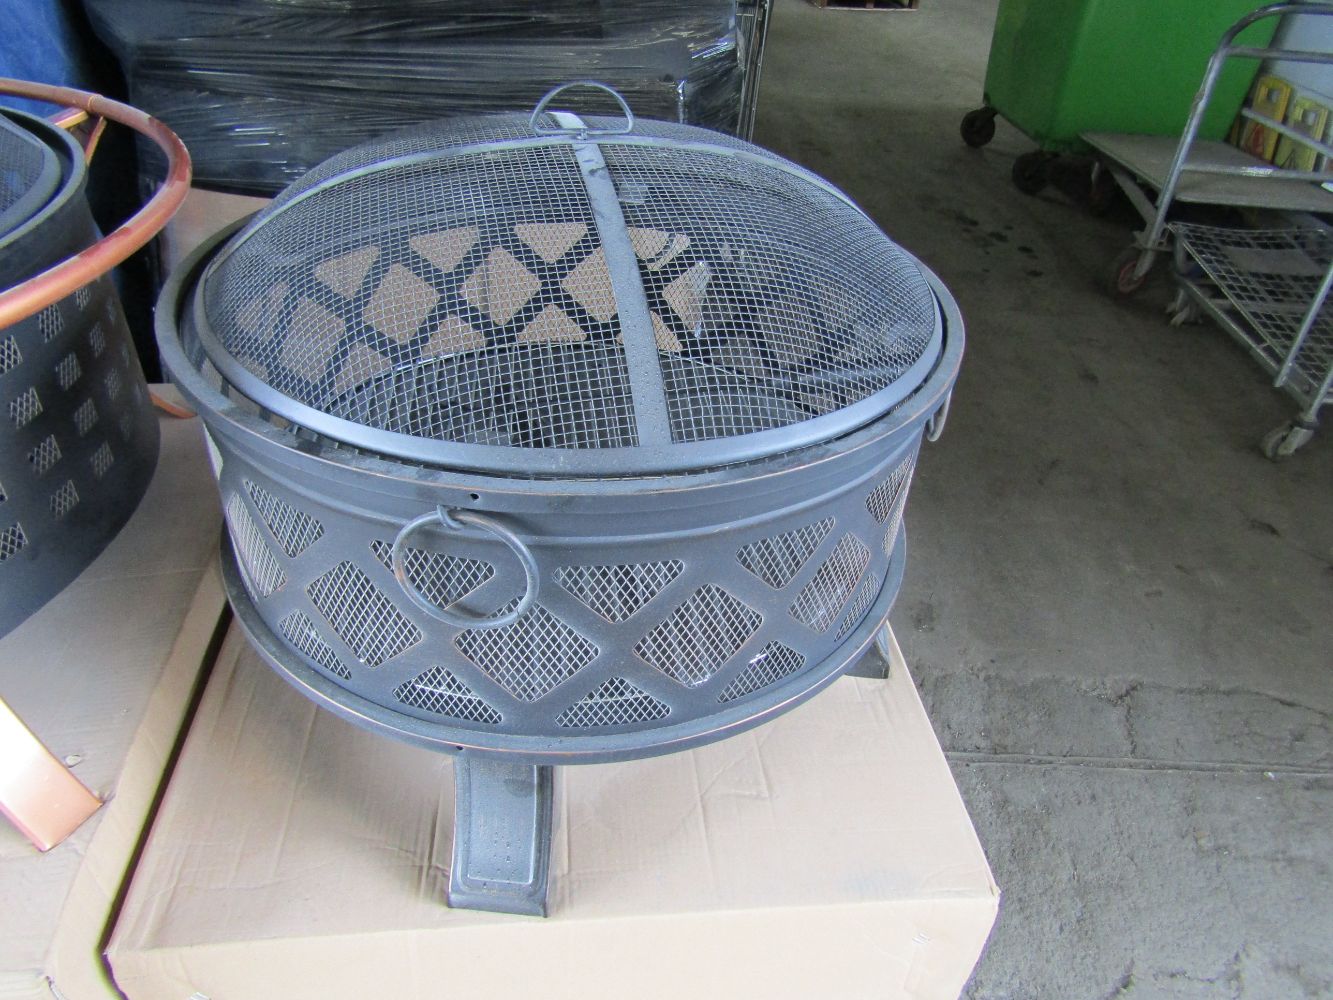 New Oren Fire Pits in single and bulk lots